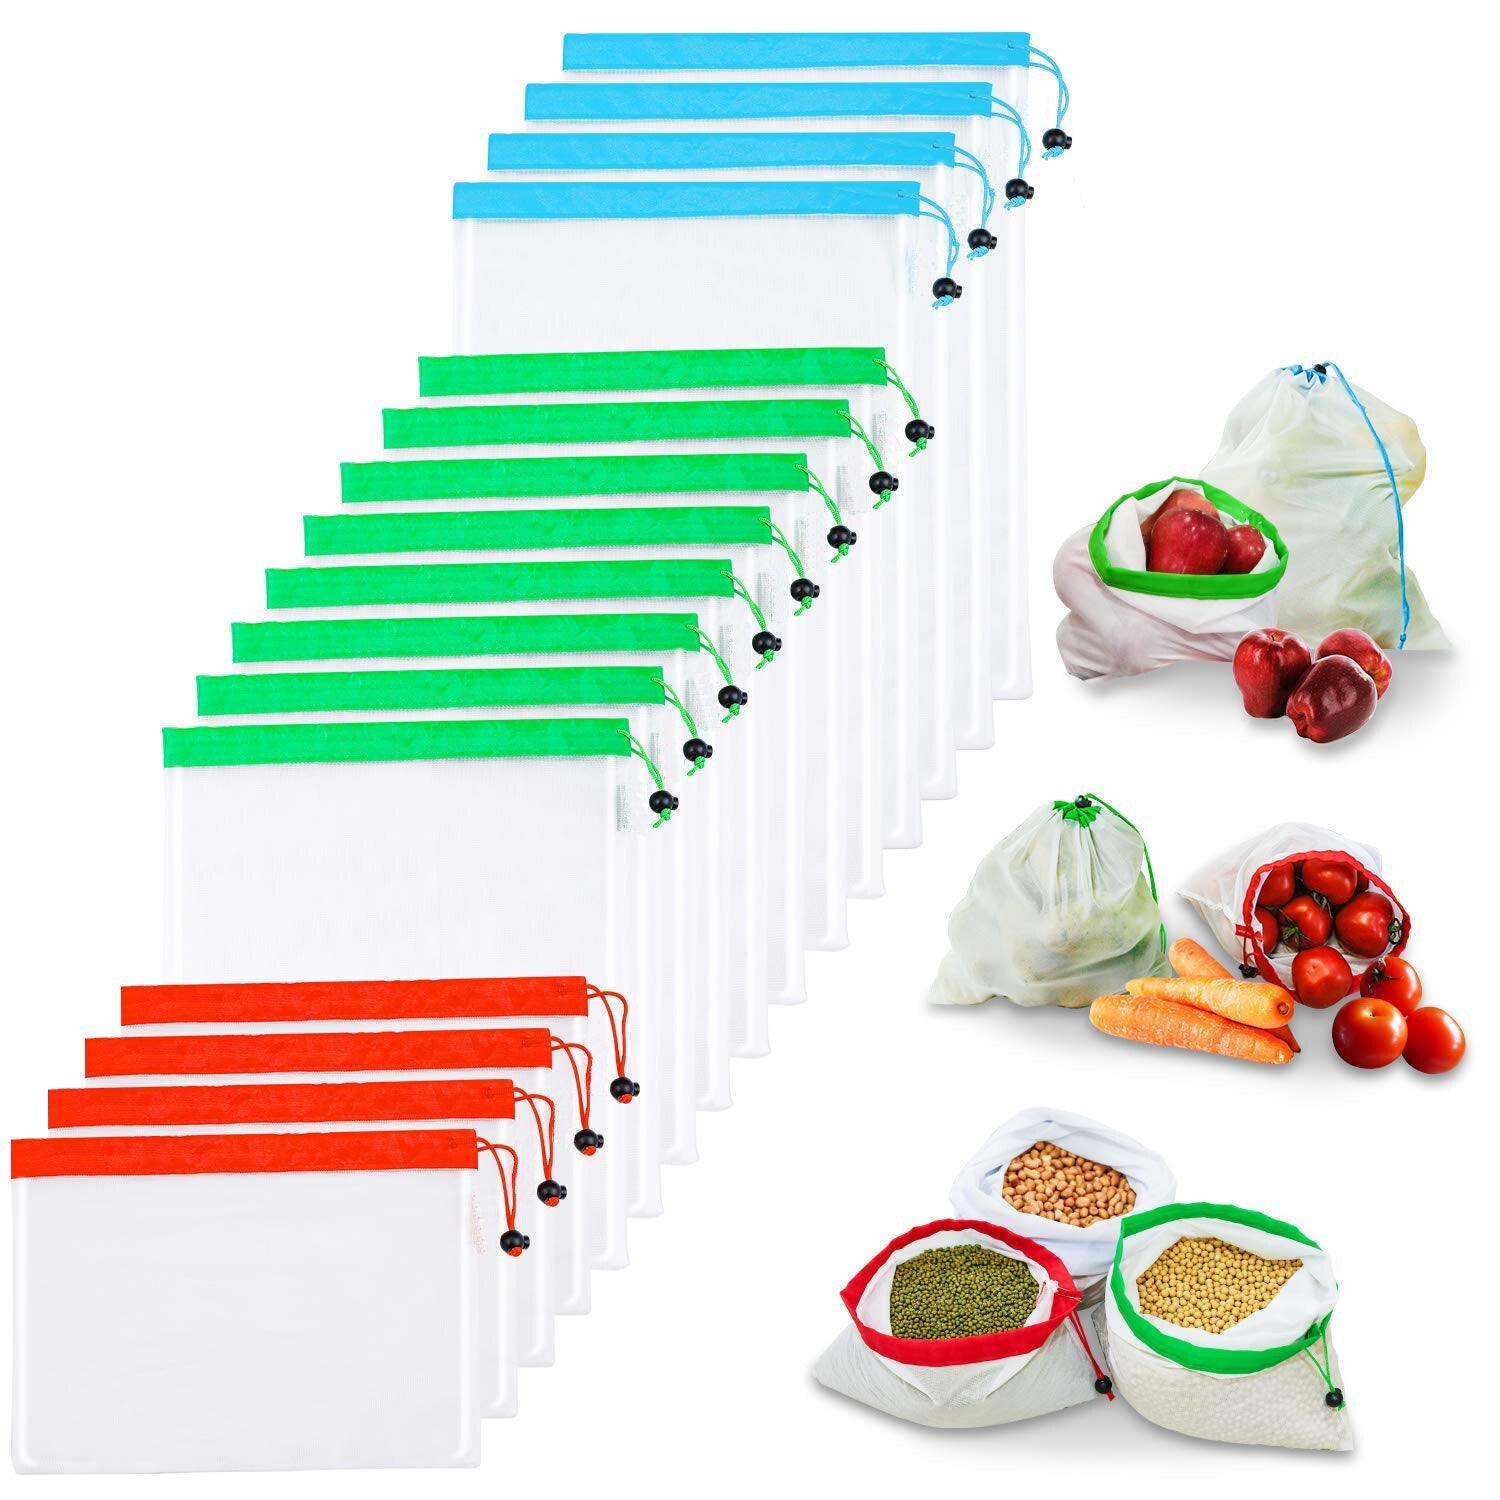 Reusable Produce Bags,Reusable Mesh Bags 16 pcs Washable Eco Friendly Bags with Tare Weight on Tags for Grocery Shopping - ebowsos